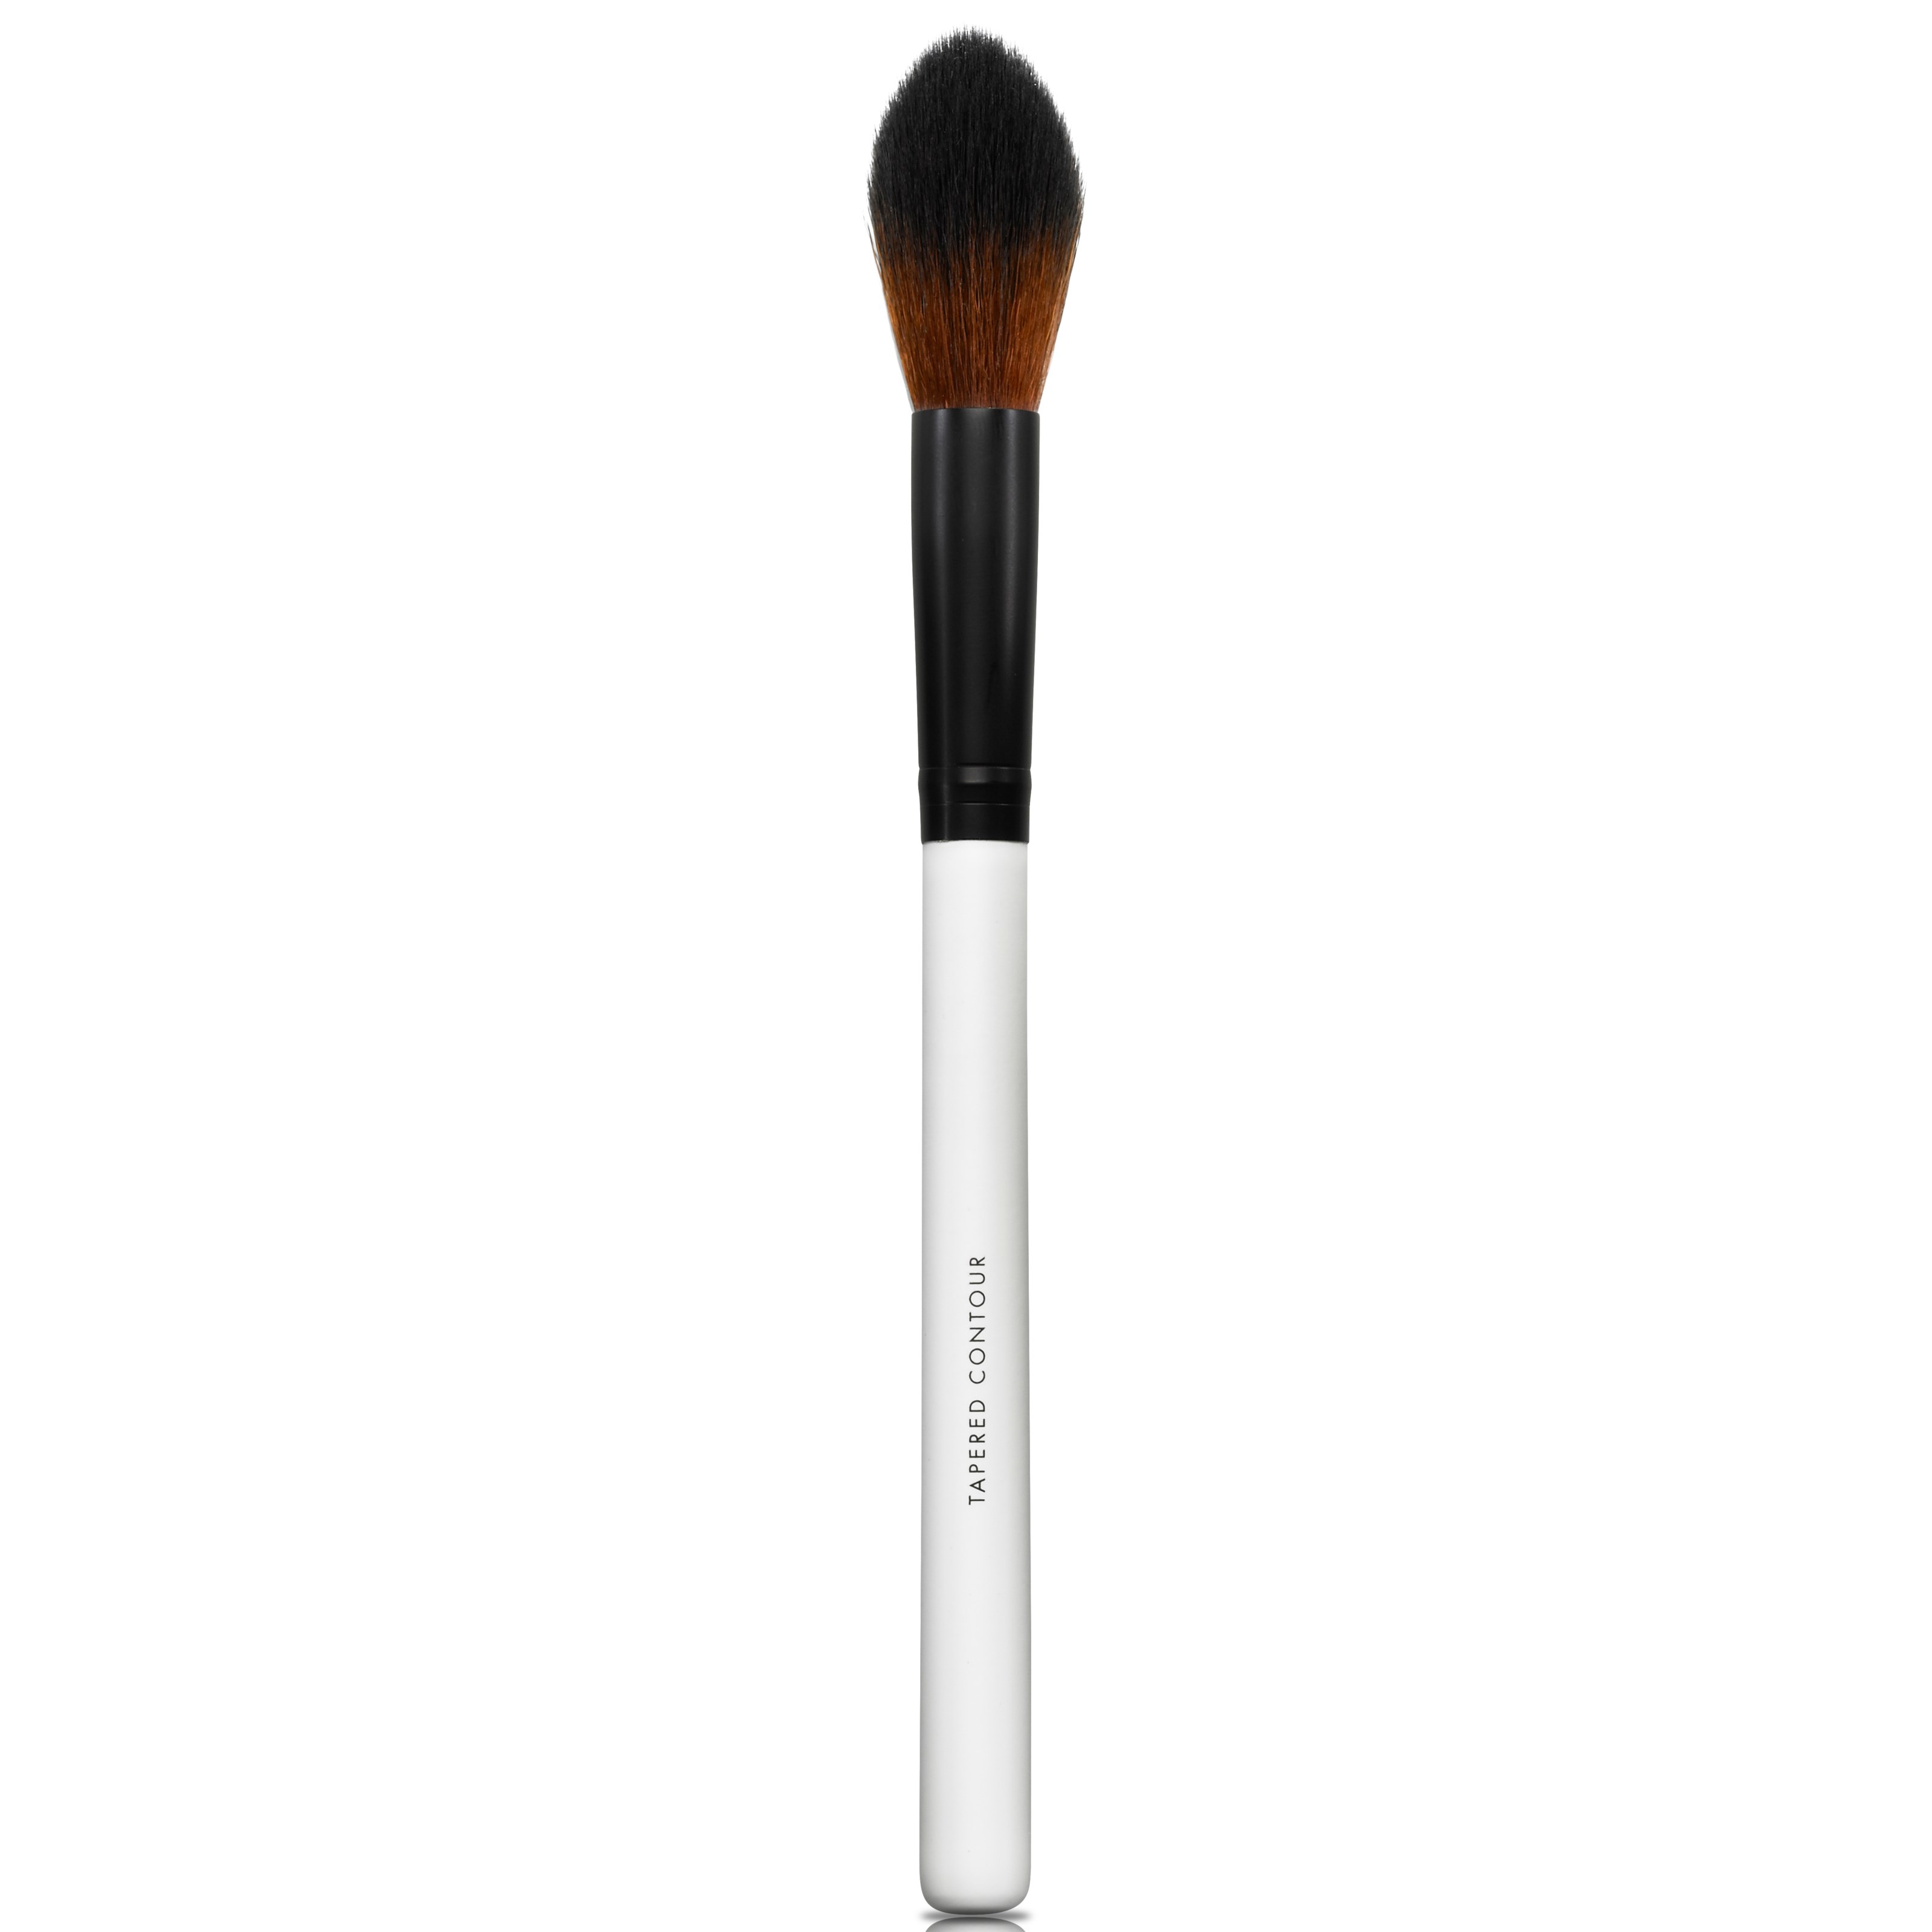 Läs mer om Lily Lolo Tapered Contour Brush